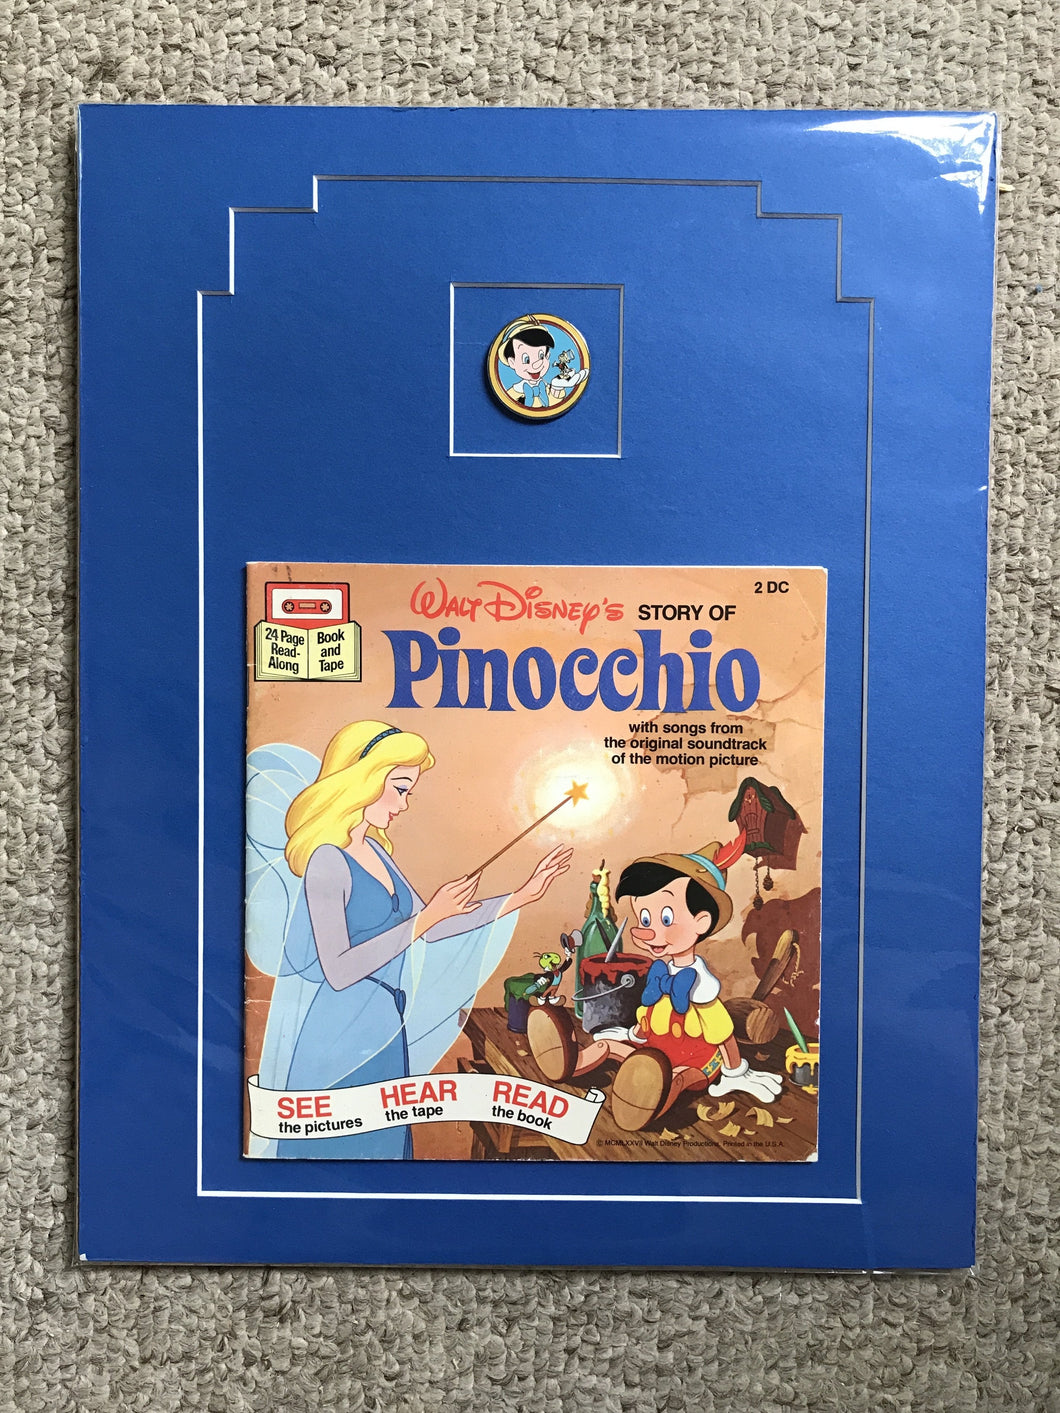 Pinocchio read along book from the 80’s and Disney collectors print.